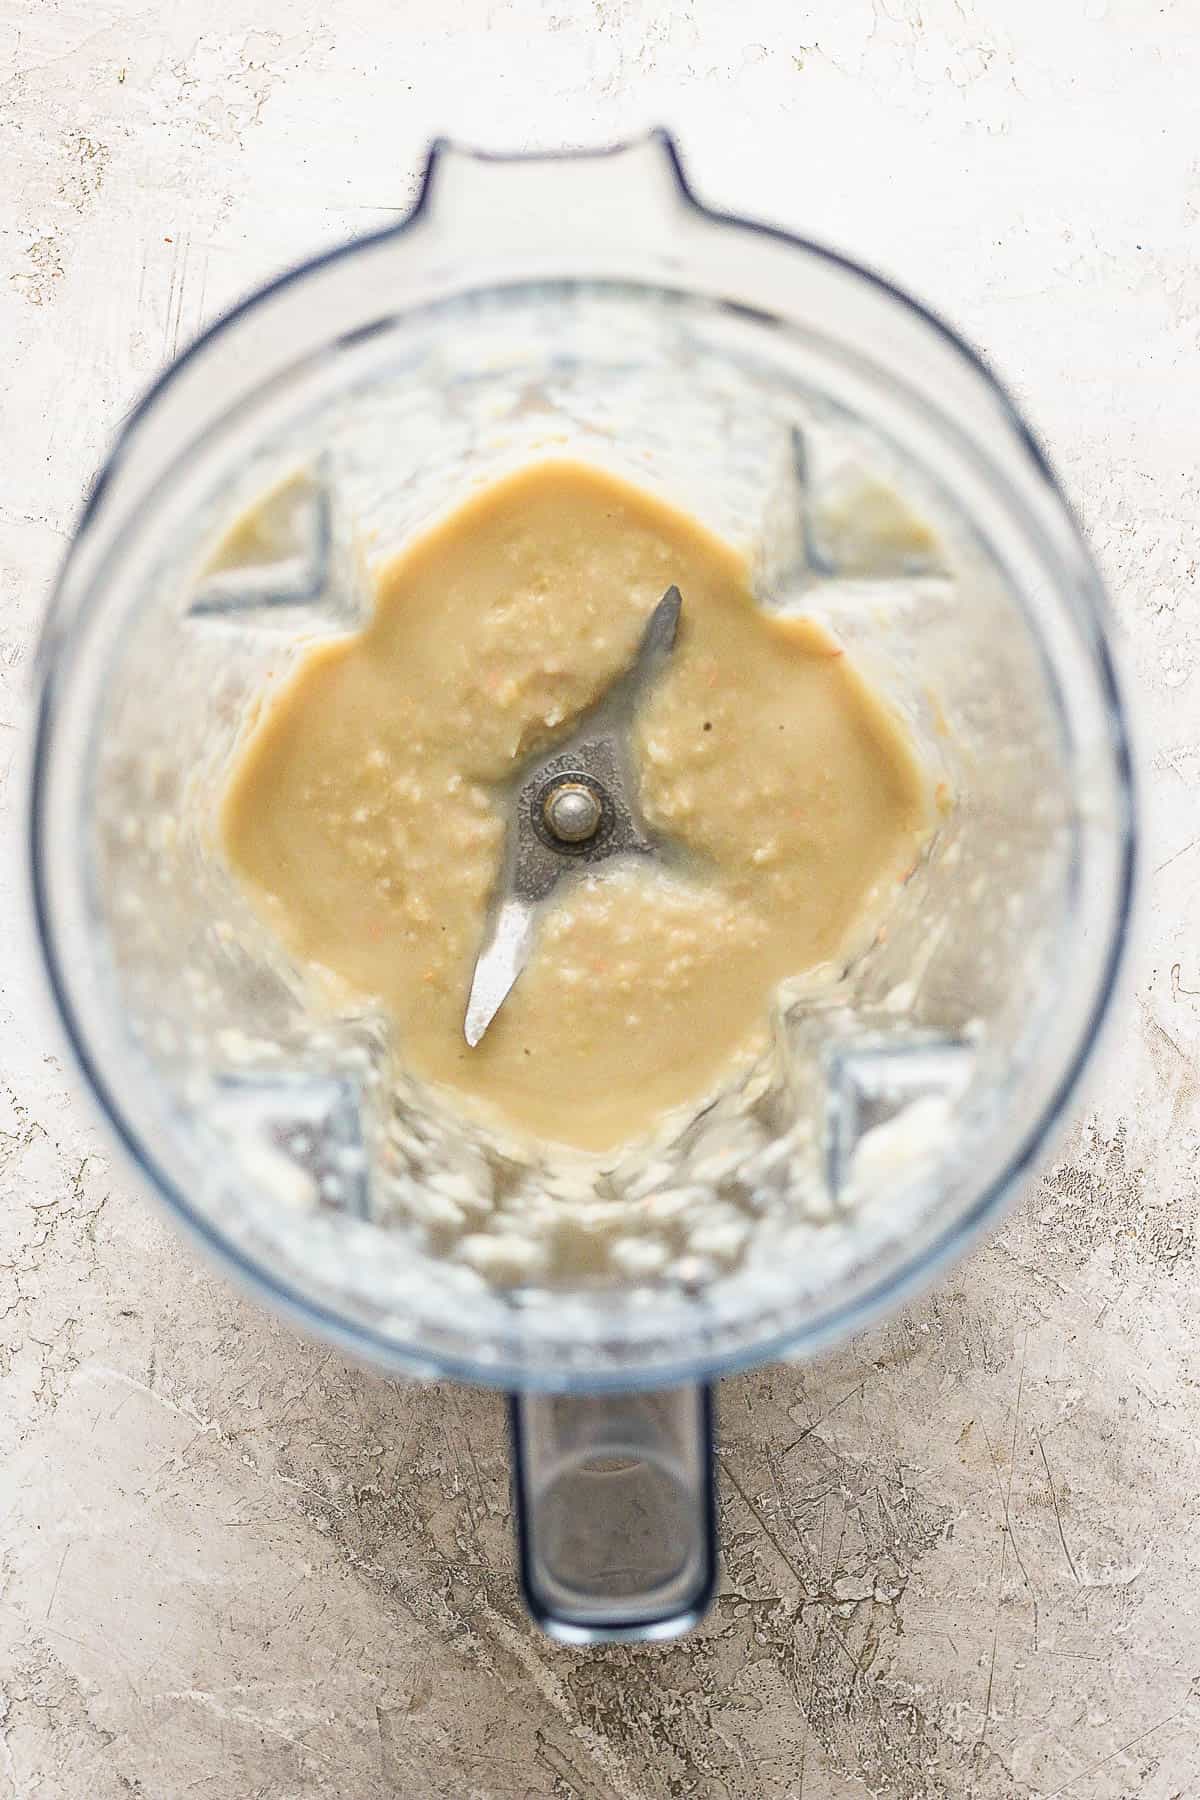 Blended cannellini beans and broth in a blender.